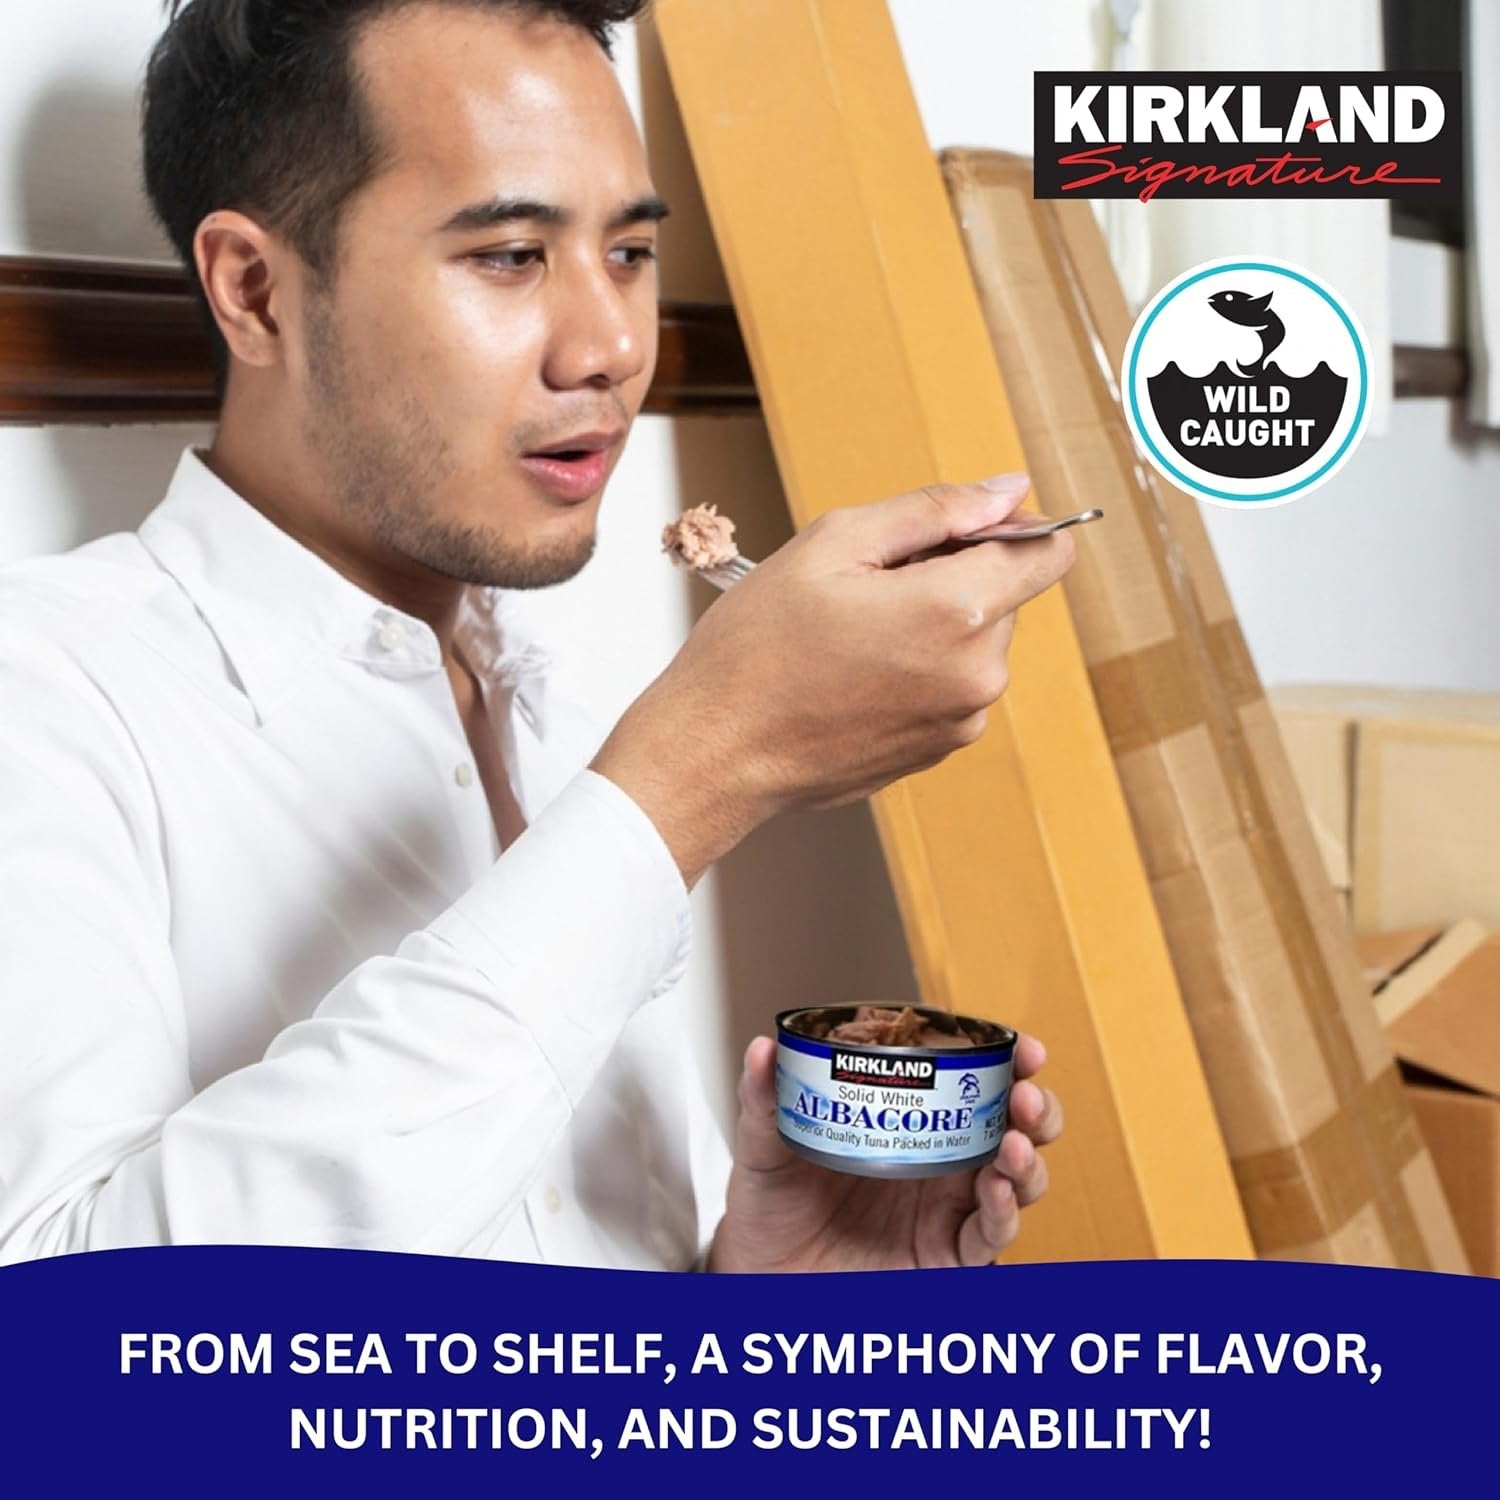 Kirkland Signature Solid White Albacore - Superior Quality Tuna Packed in Water - Pack of 8 - with Keychain